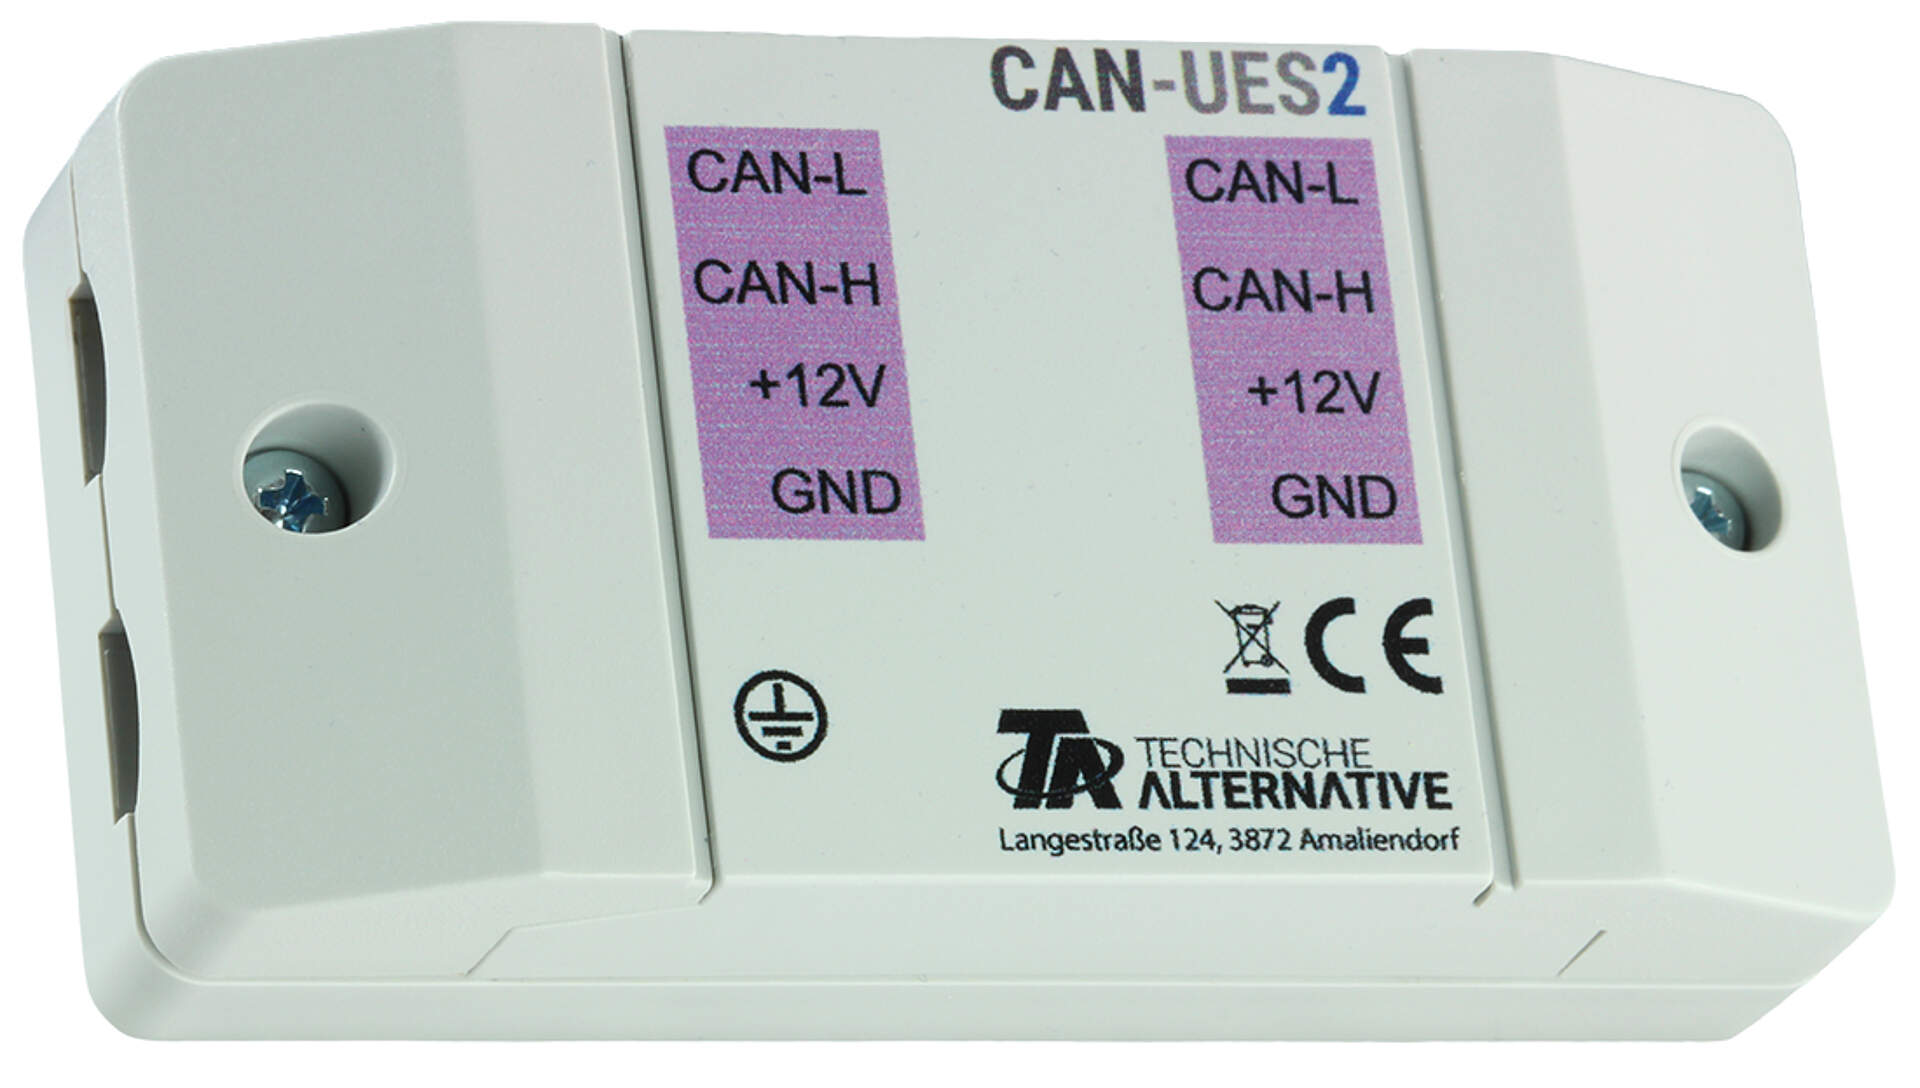 CAN-UES2 in universal housing